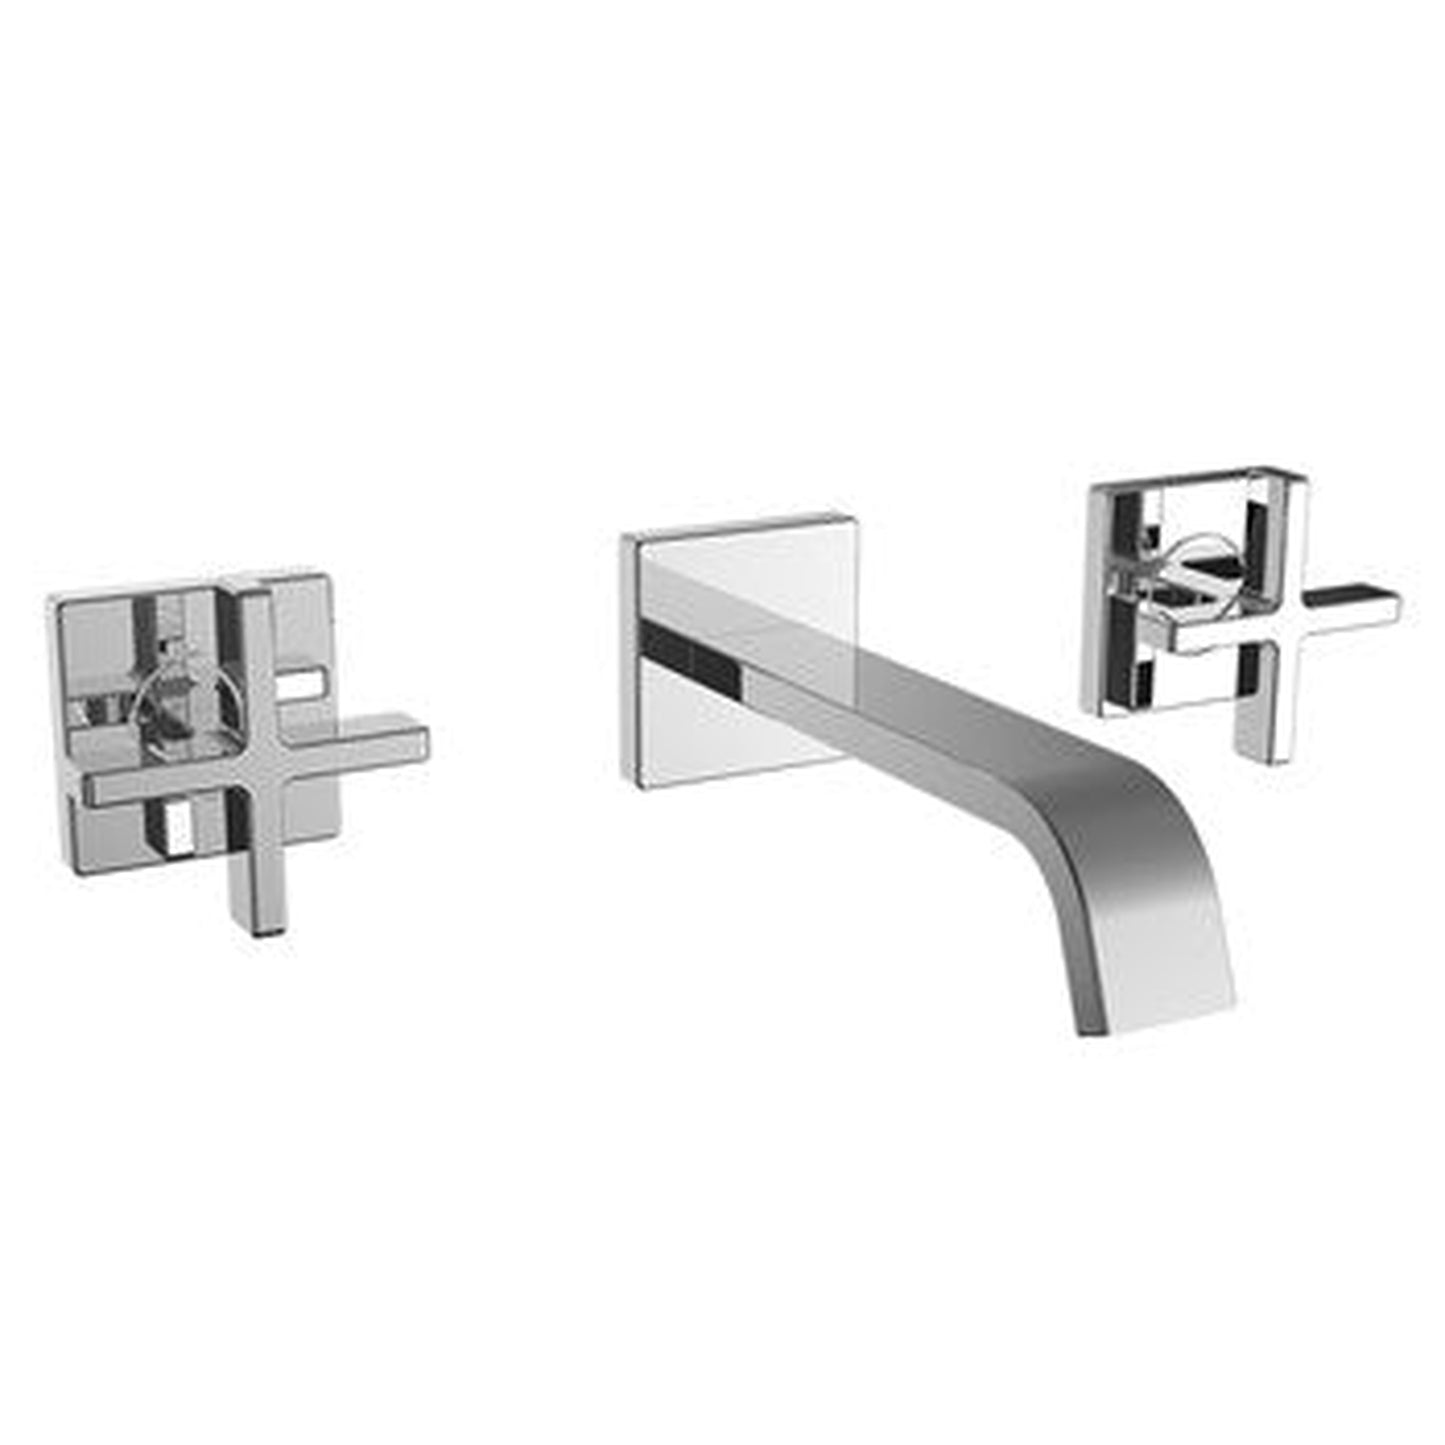 Speakman Lura 1.2 GPM Polished Chrome Cross Handles Wall-Mounted Faucet